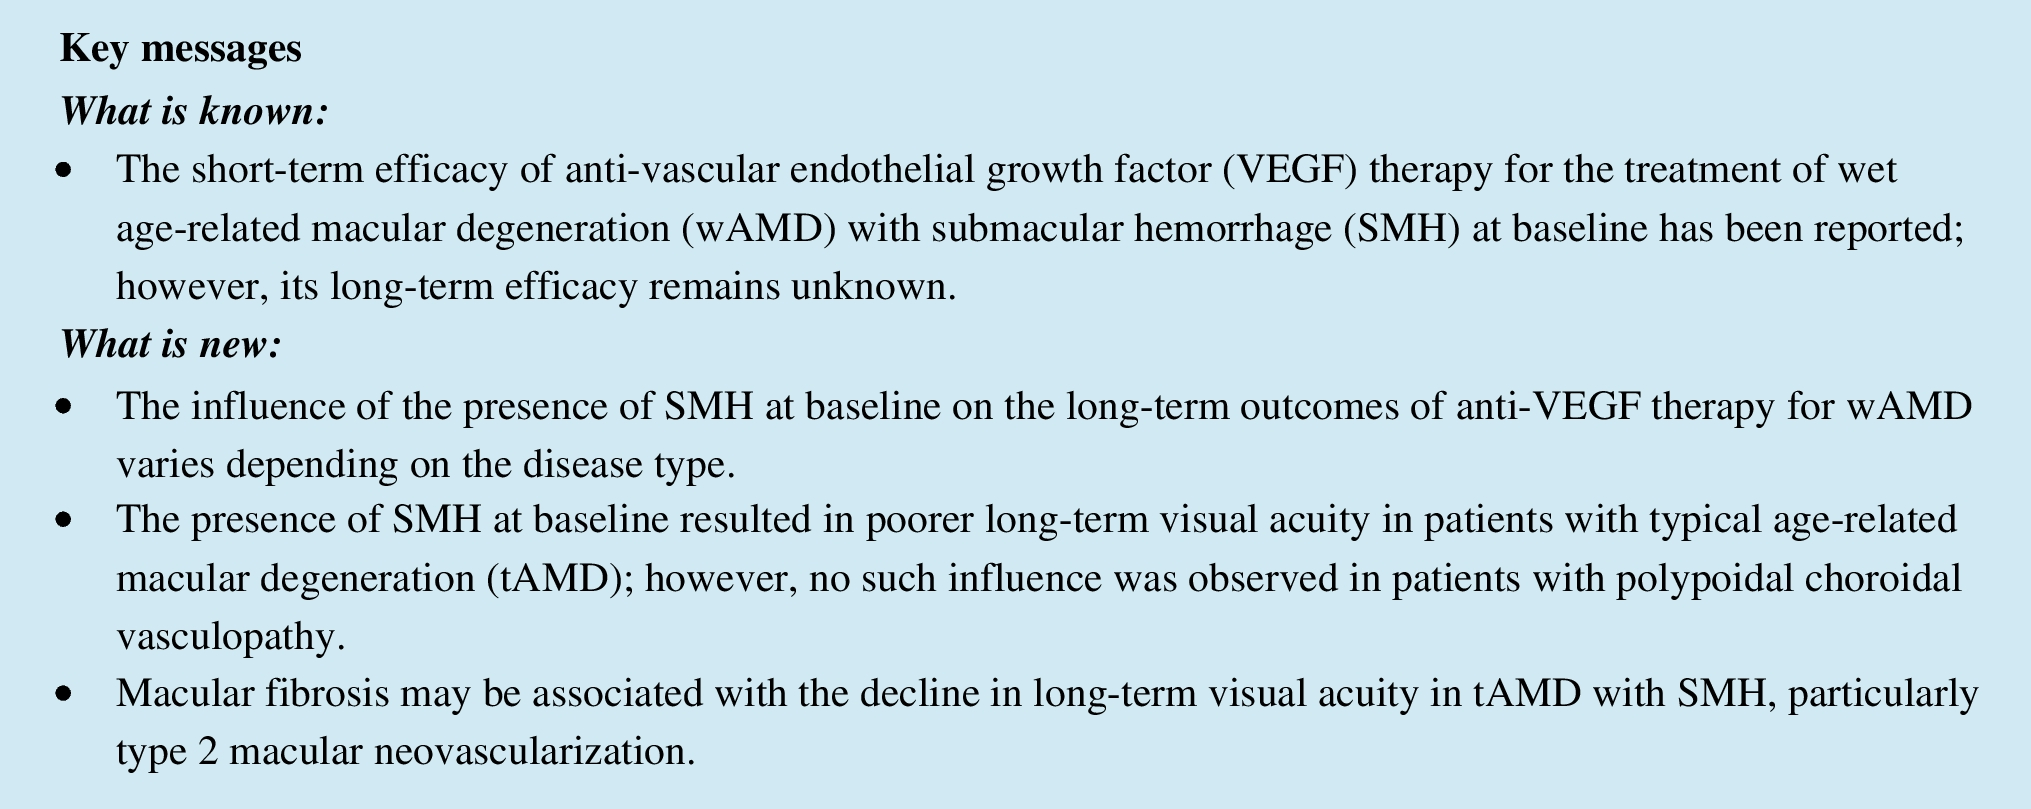 Influence of submacular hemorrhage at baseline on the long-term outcomes of aflibercept treatment for typical neovascular age-related macular degeneration and polypoidal choroidal vasculopathy